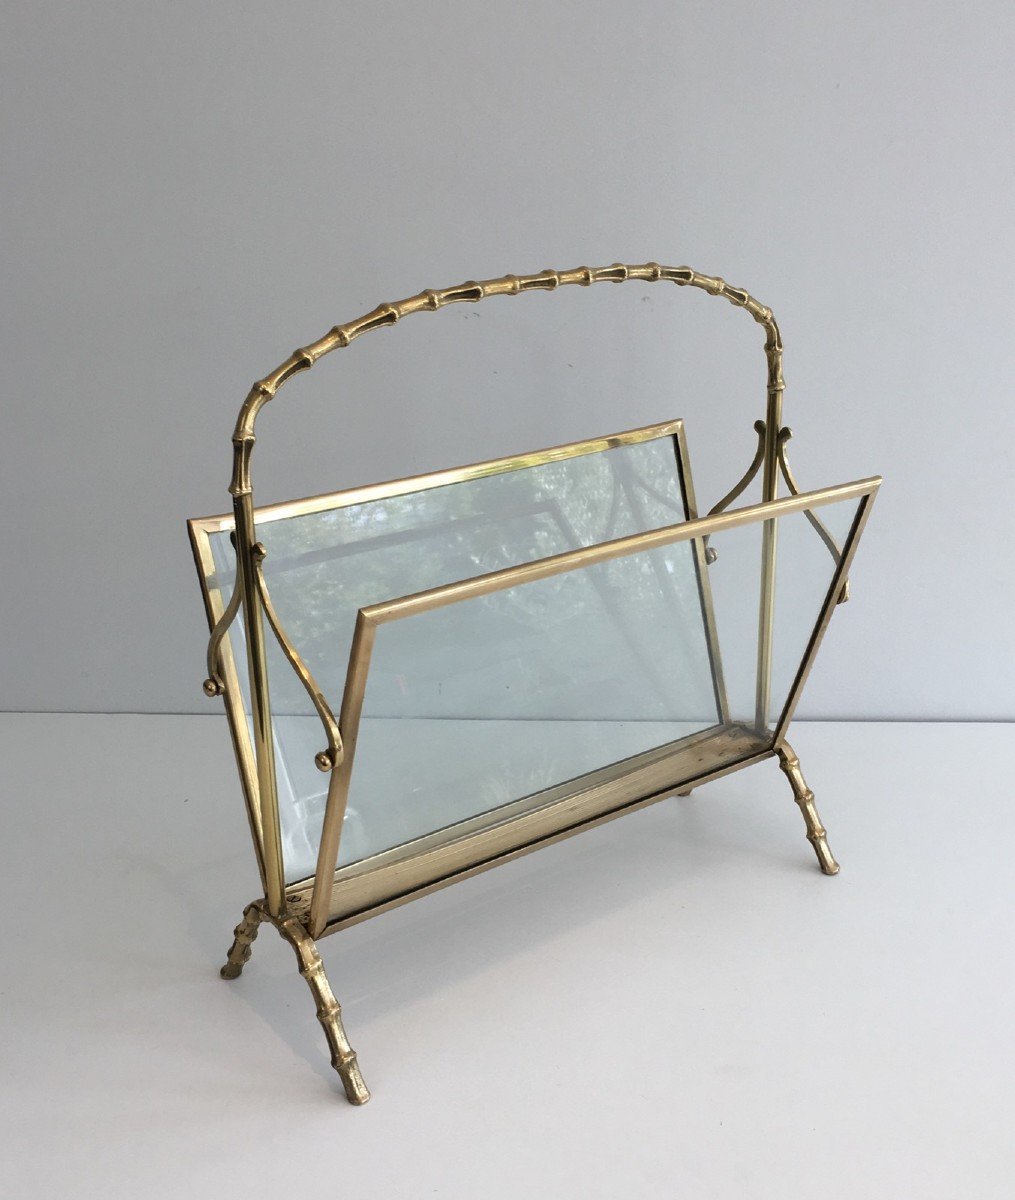 Faux-bamboo-style Magazine Rack In Brass And Transparent Glass Side Panels. 